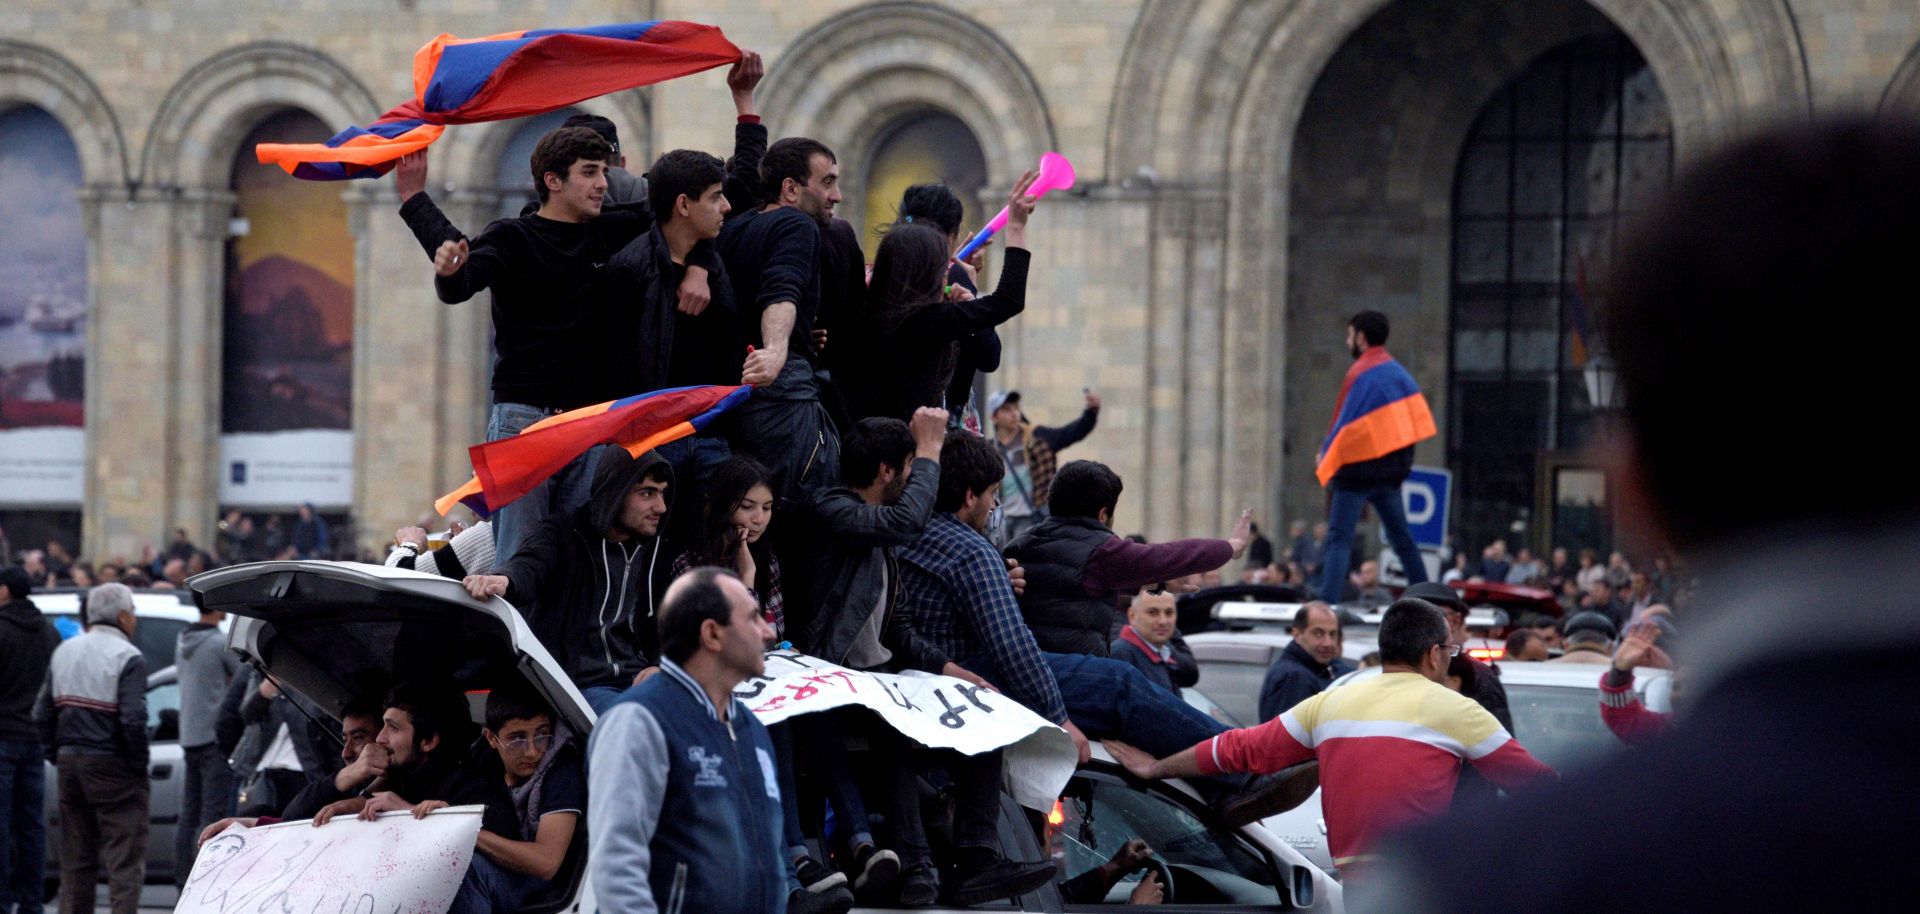 Armenians in Yerevan demonstrate against the former president's appointment as prime minister.